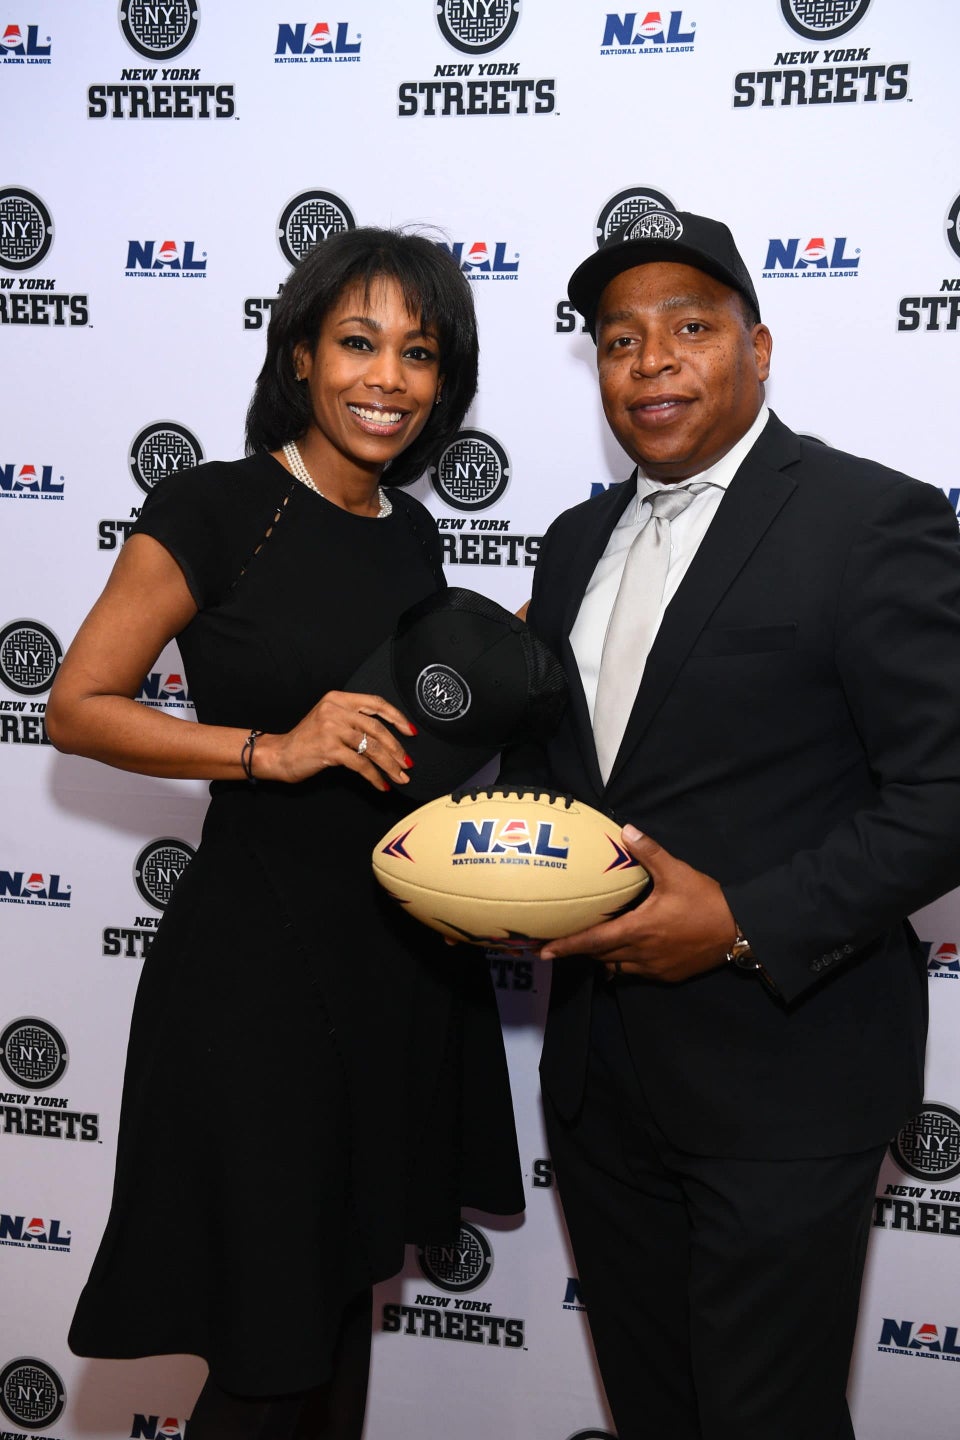 Meet the Black Couple Bringing A Professional Football Franchise To New York City